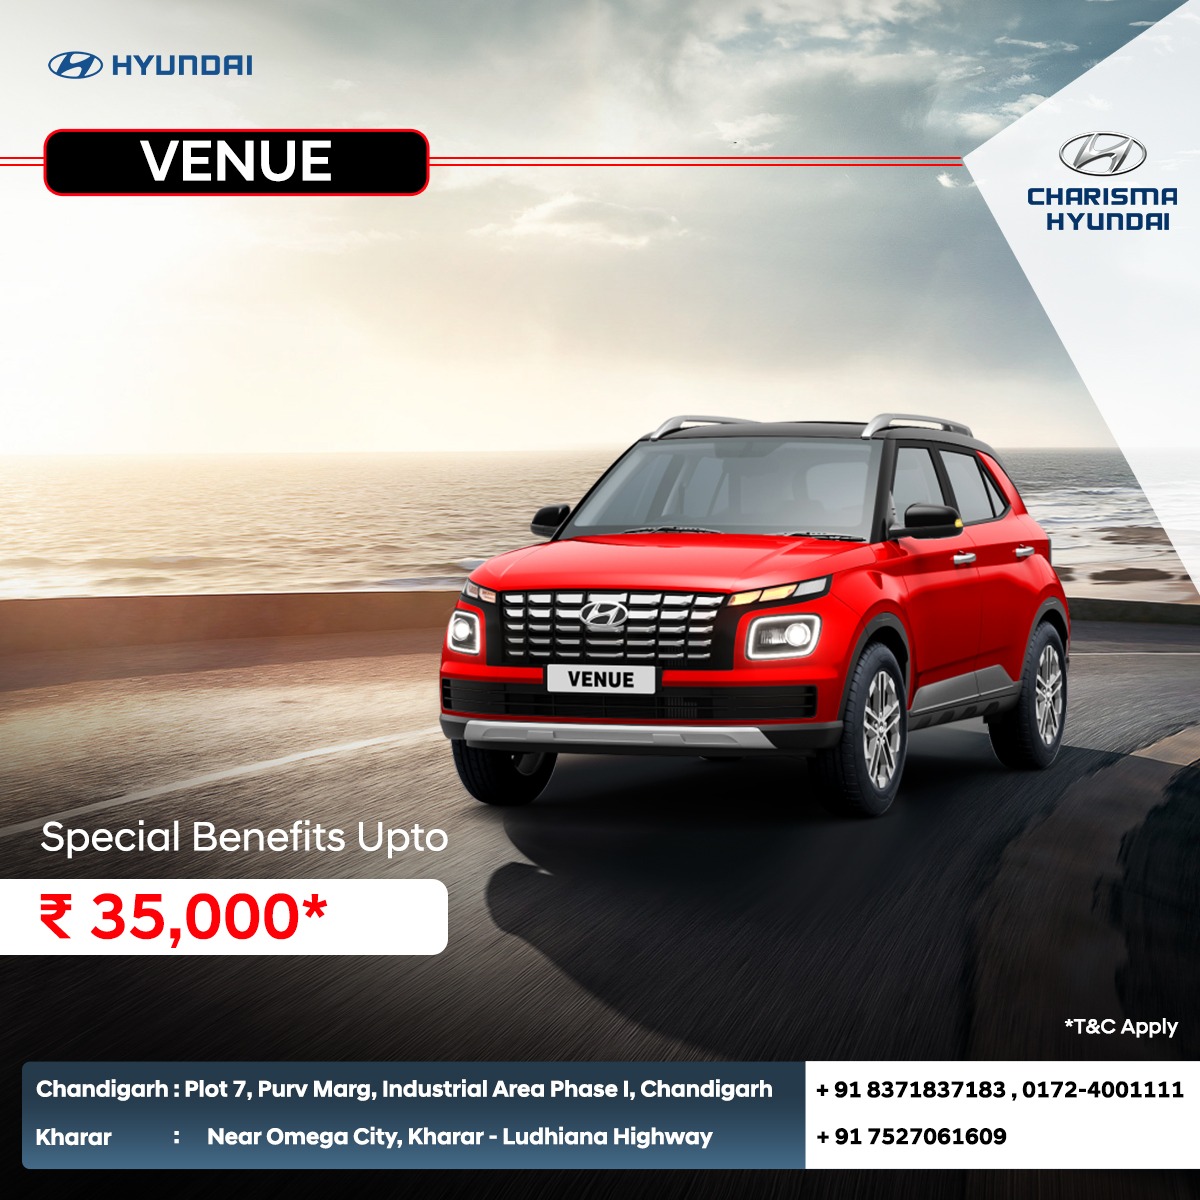 Get ready to turn heads with its sleek design and enjoy every journey with its advanced features. Whether it's cruising through the city streets or embarking on a weekend adventure, the Hyundai Venue has got you covered.
For more details, call - +91 8371837183, 0172-4001111